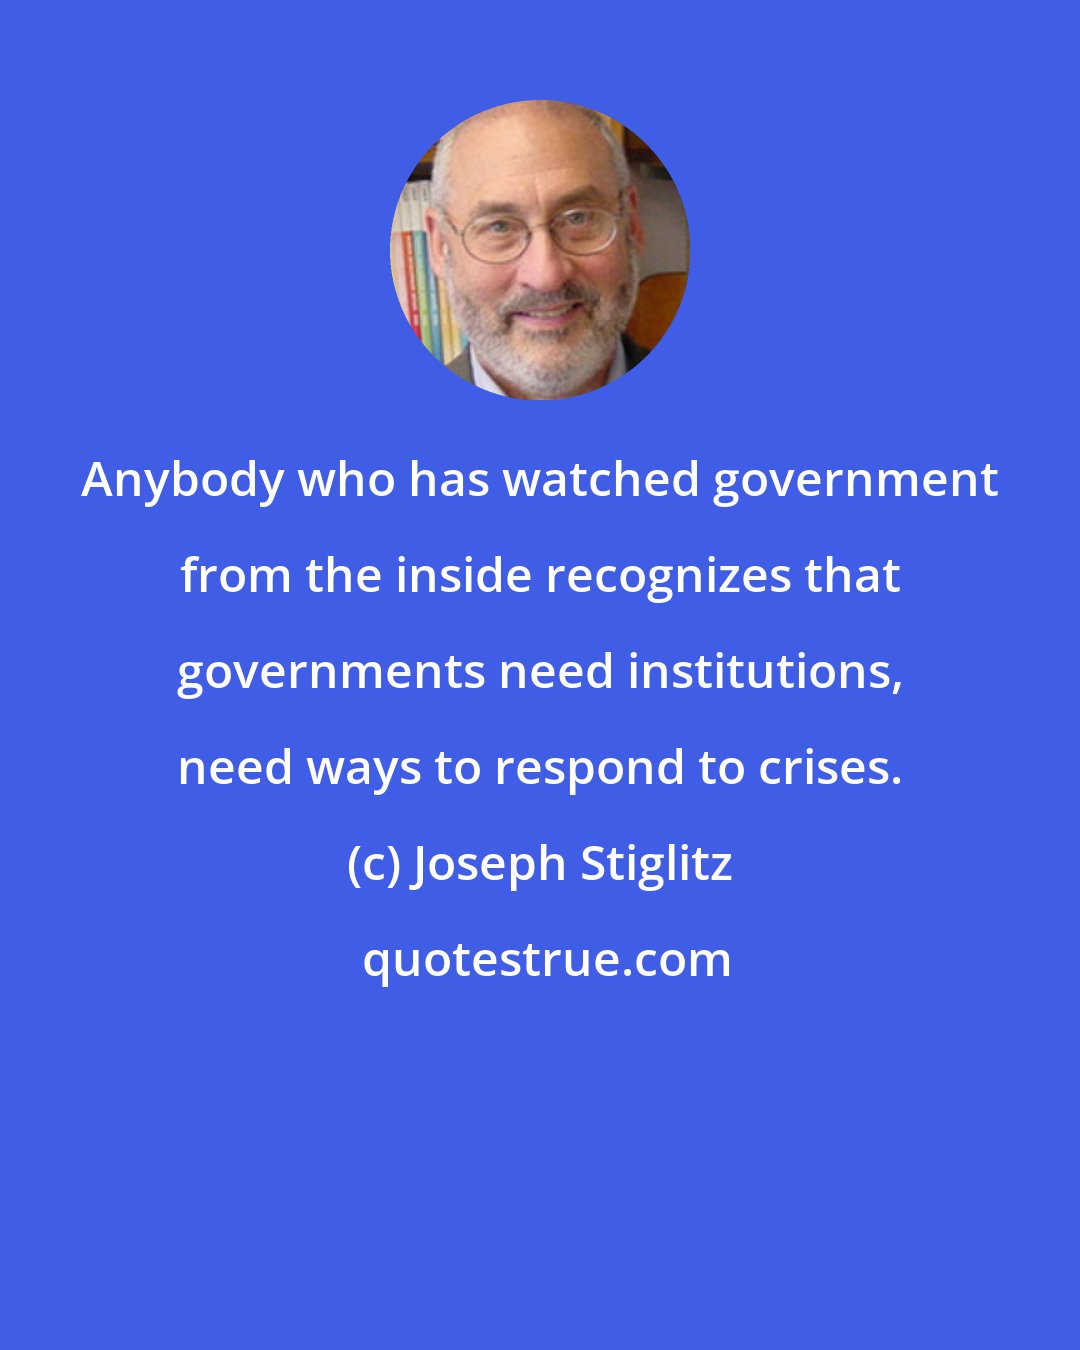 Joseph Stiglitz: Anybody who has watched government from the inside recognizes that governments need institutions, need ways to respond to crises.